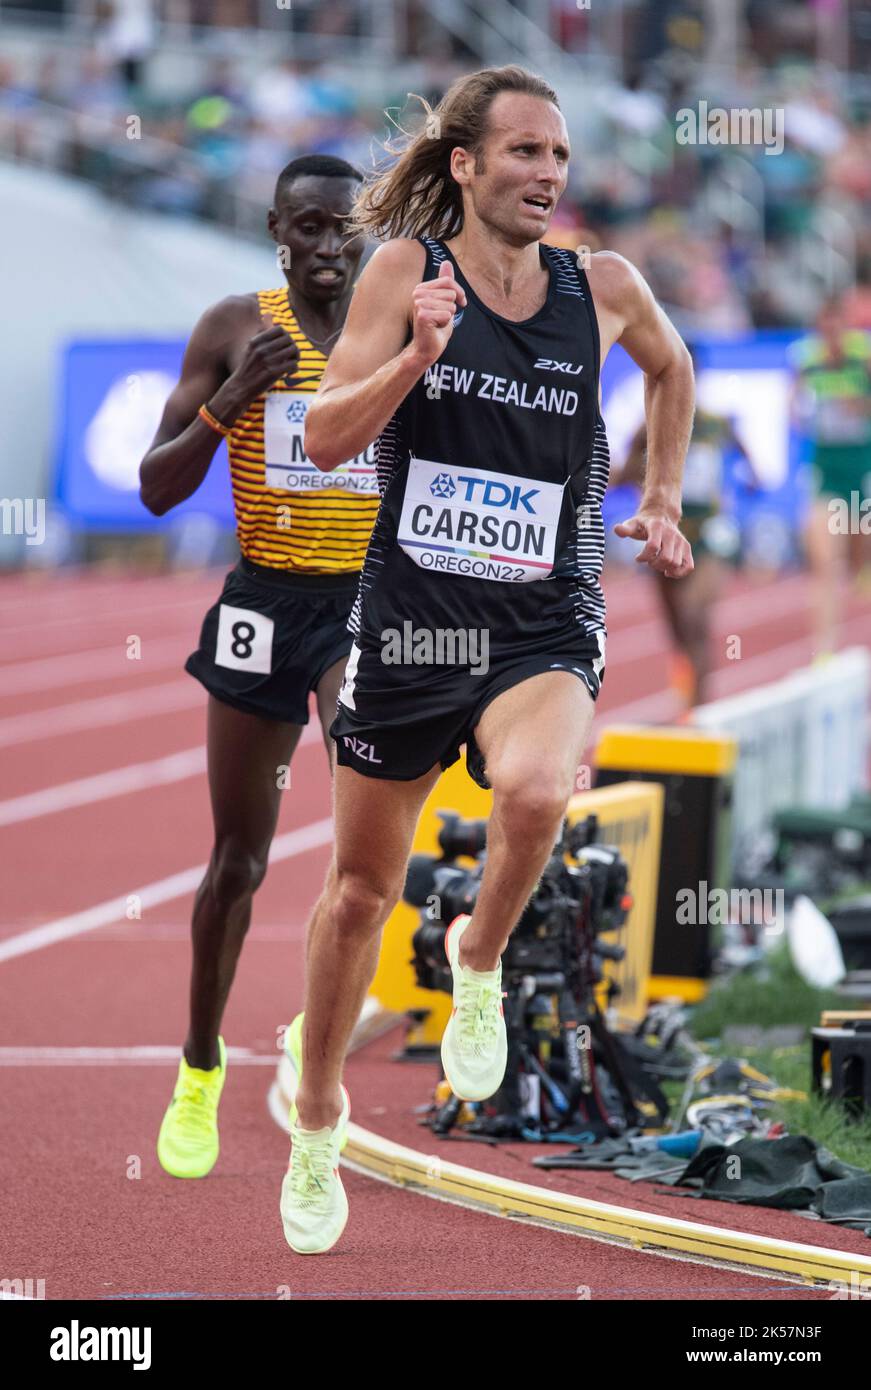 Hamish Carson of New Zealand competing in the men’s 5000m heats at the World Athletics Championships, Hayward Field, Eugene, Oregon USA on the 21st Ju Stock Photo